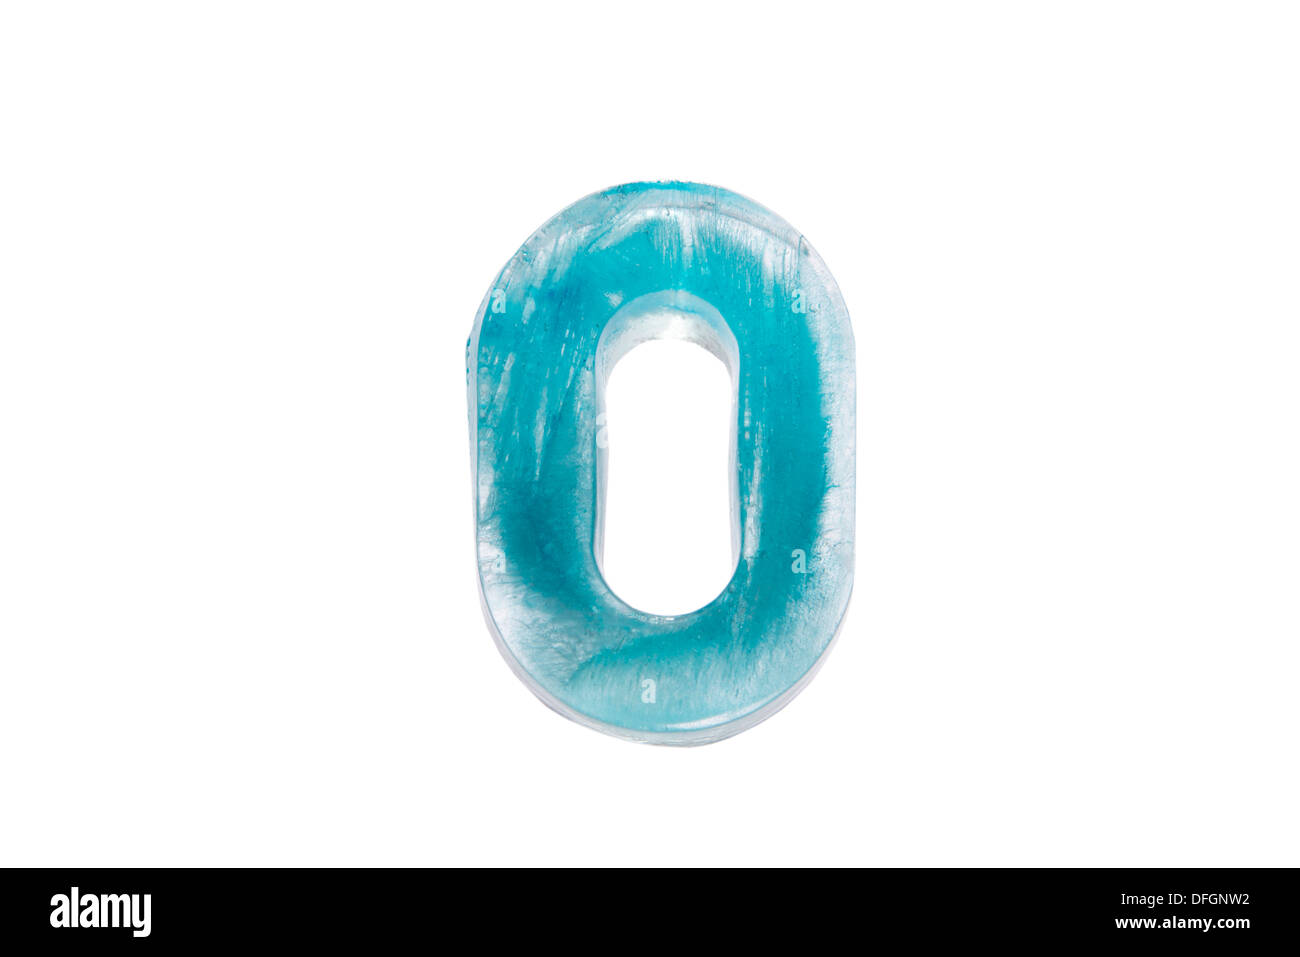 O, letter o made from blue ice Stock Photo